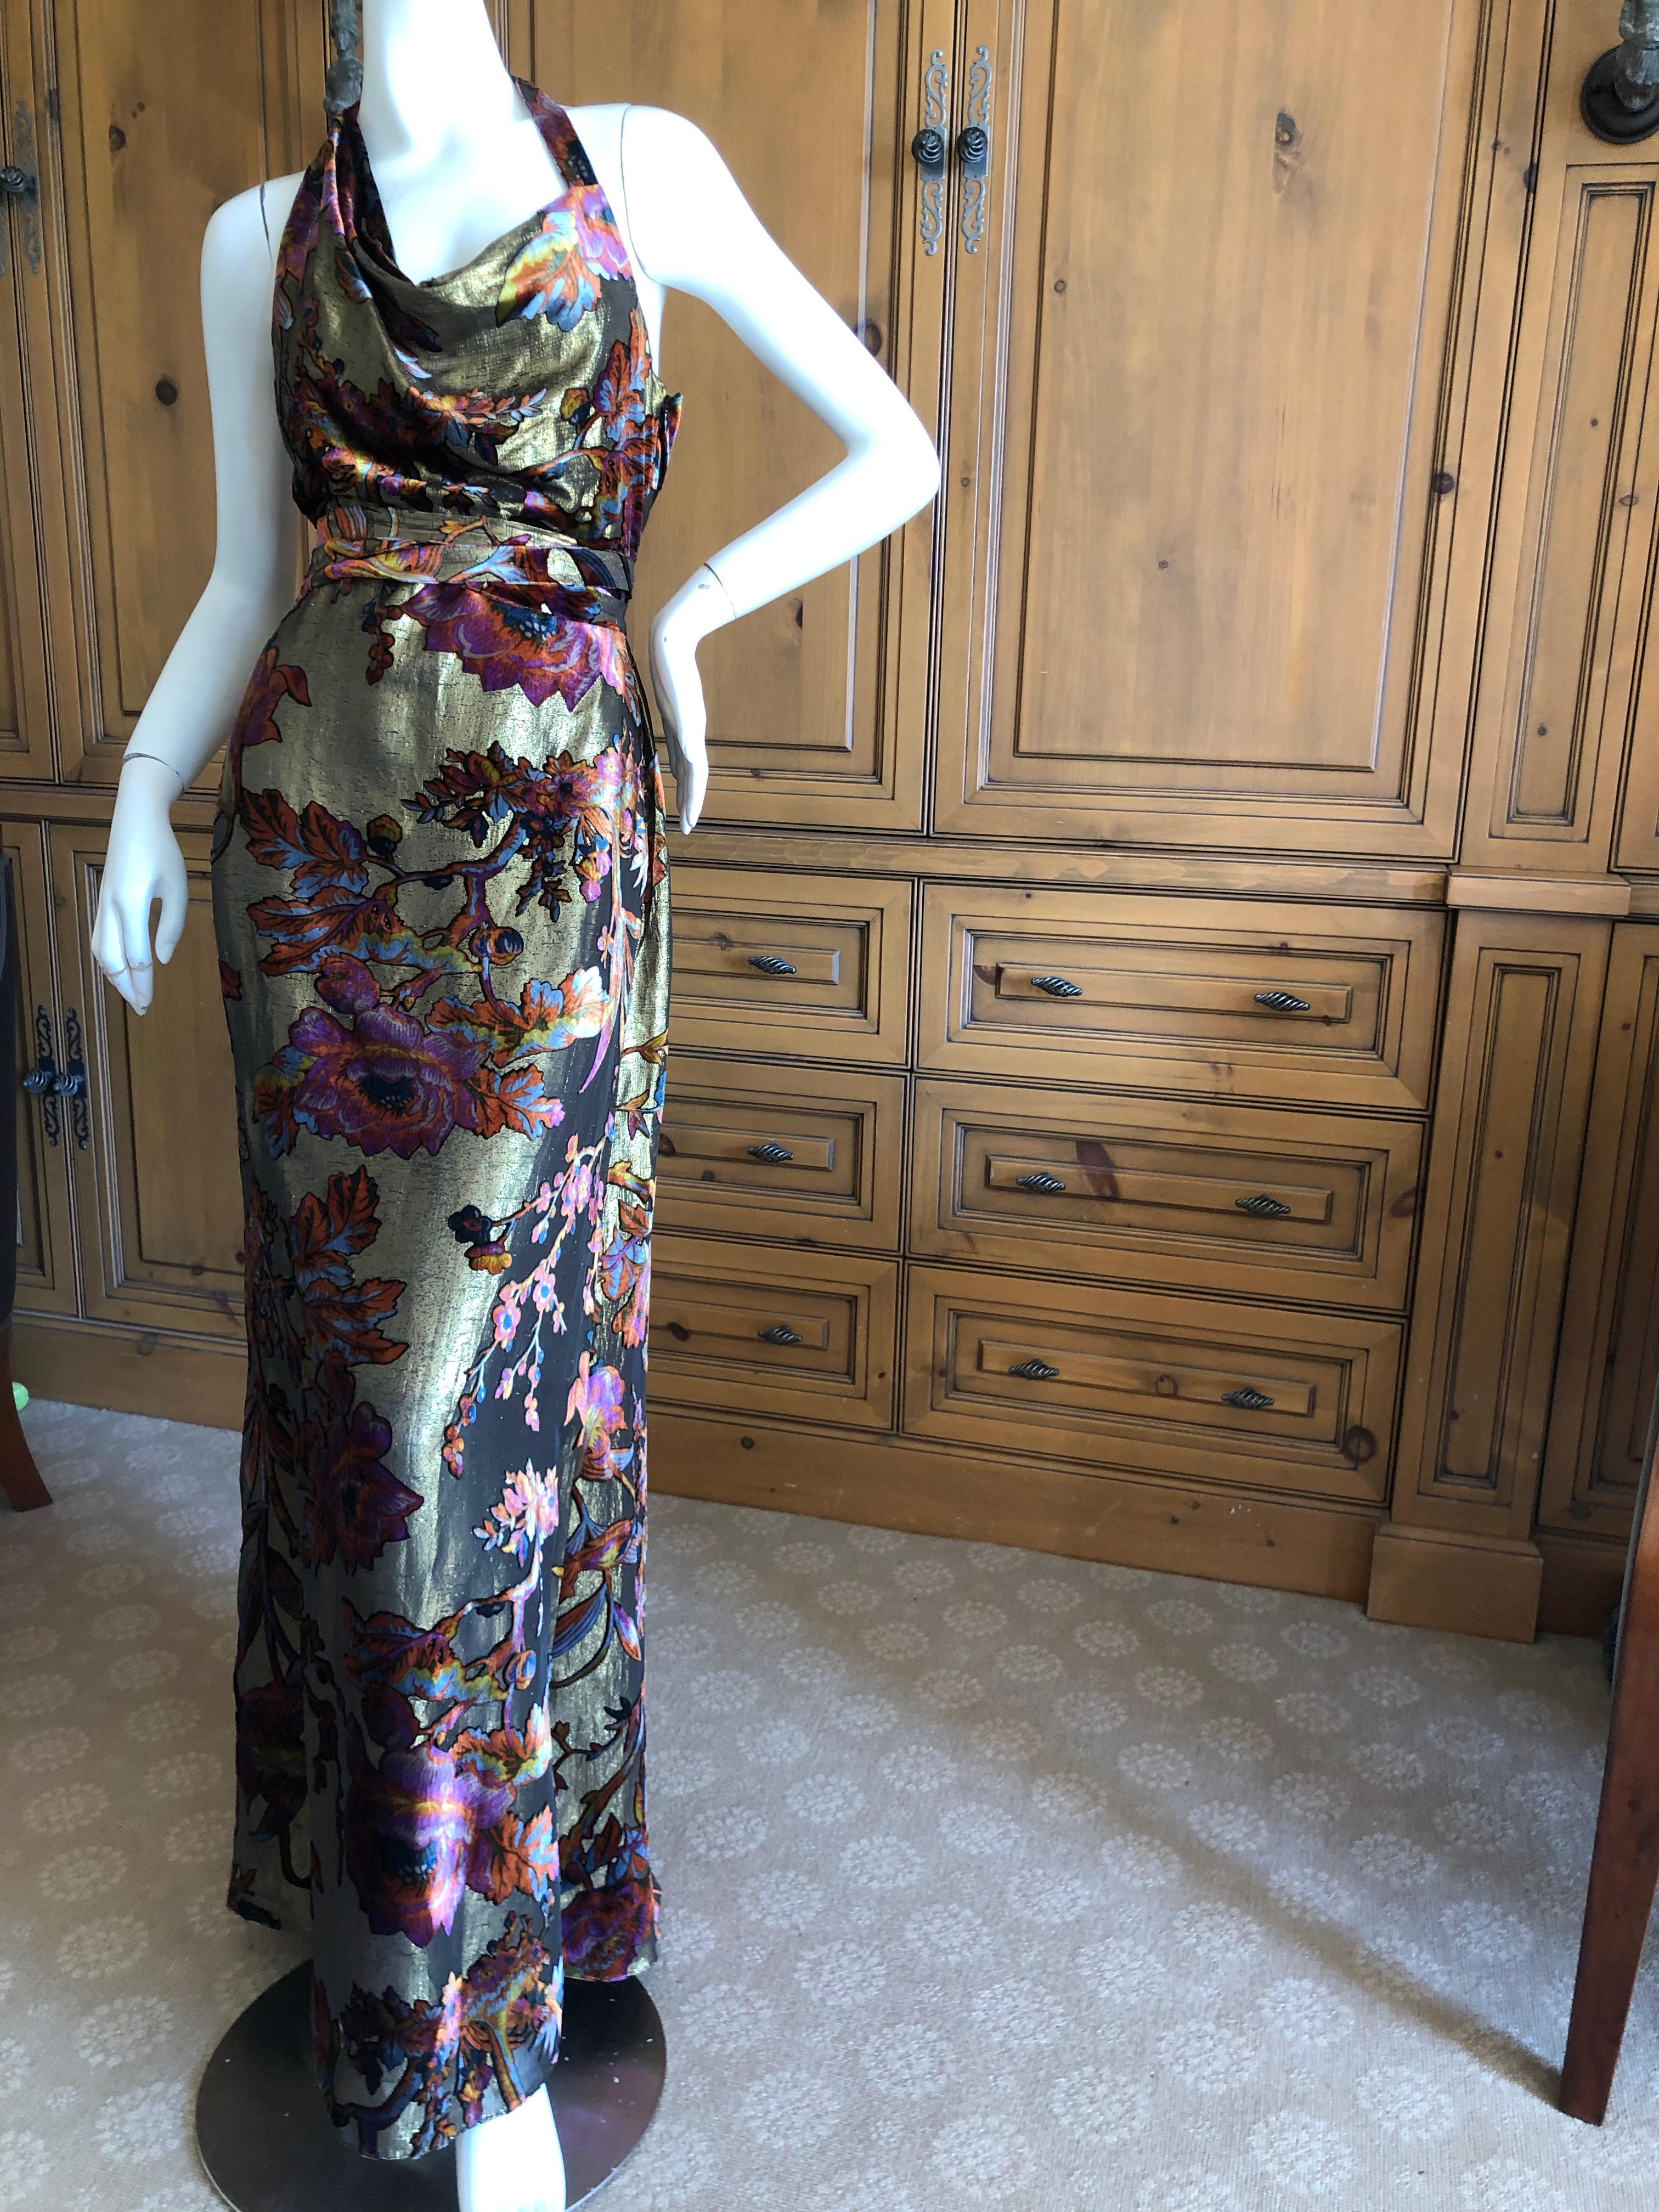 Christian Lacroix Vintage Gold Velvet Floral Print Evening Dress.
This is so beautiful, but the gold doesn't read in the photos well, There is a very gold sheen to the velvet.
Size 40
Bust 40